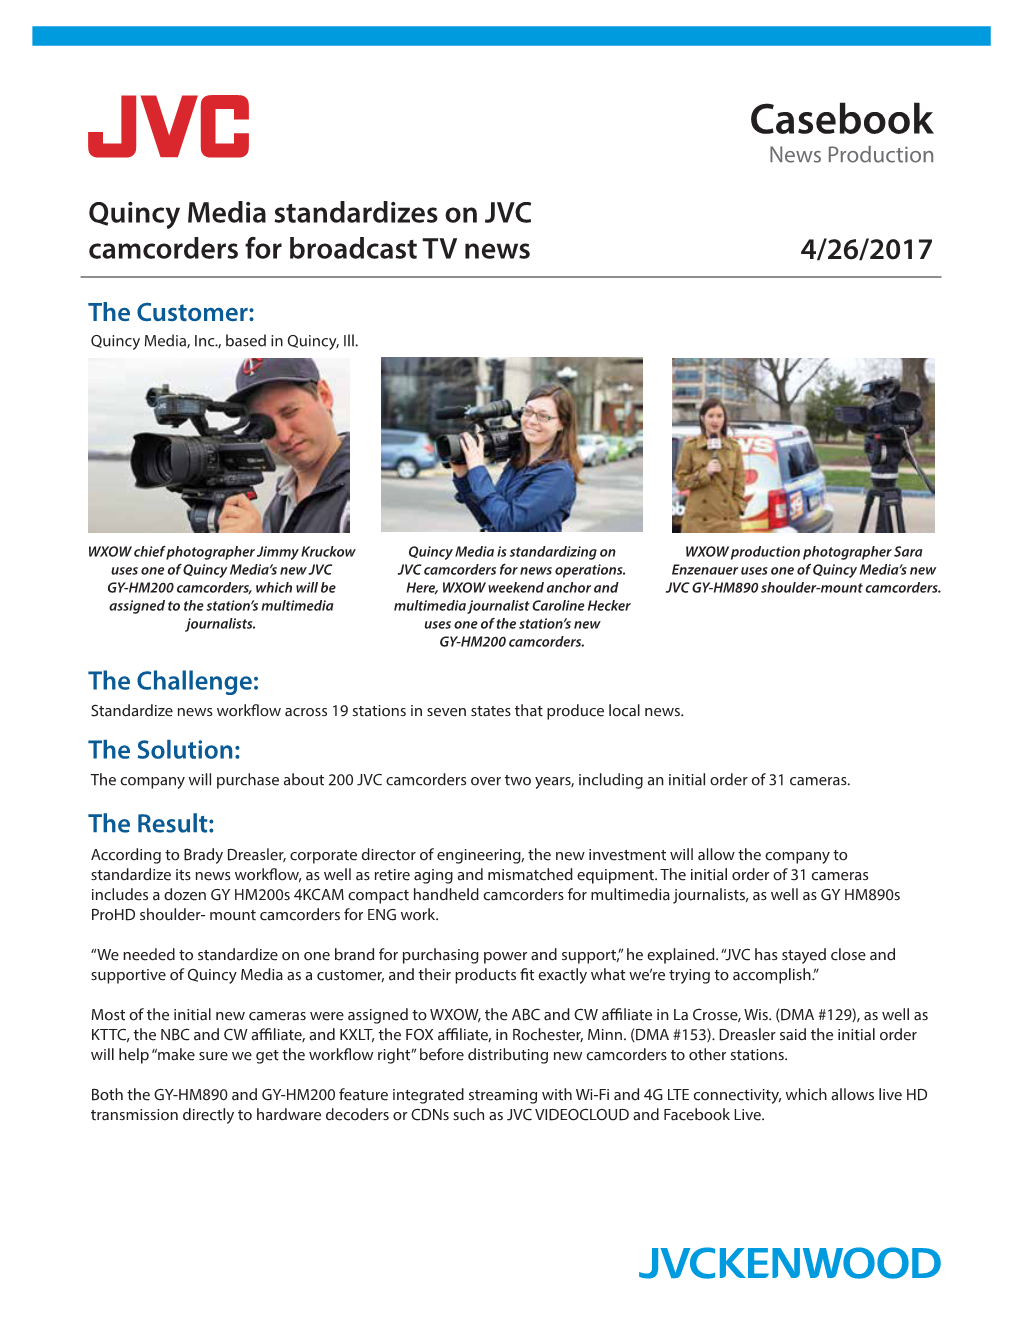 Quincy Media Standardizes on JVC Camcorders for Broadcast TV News 4/26/2017